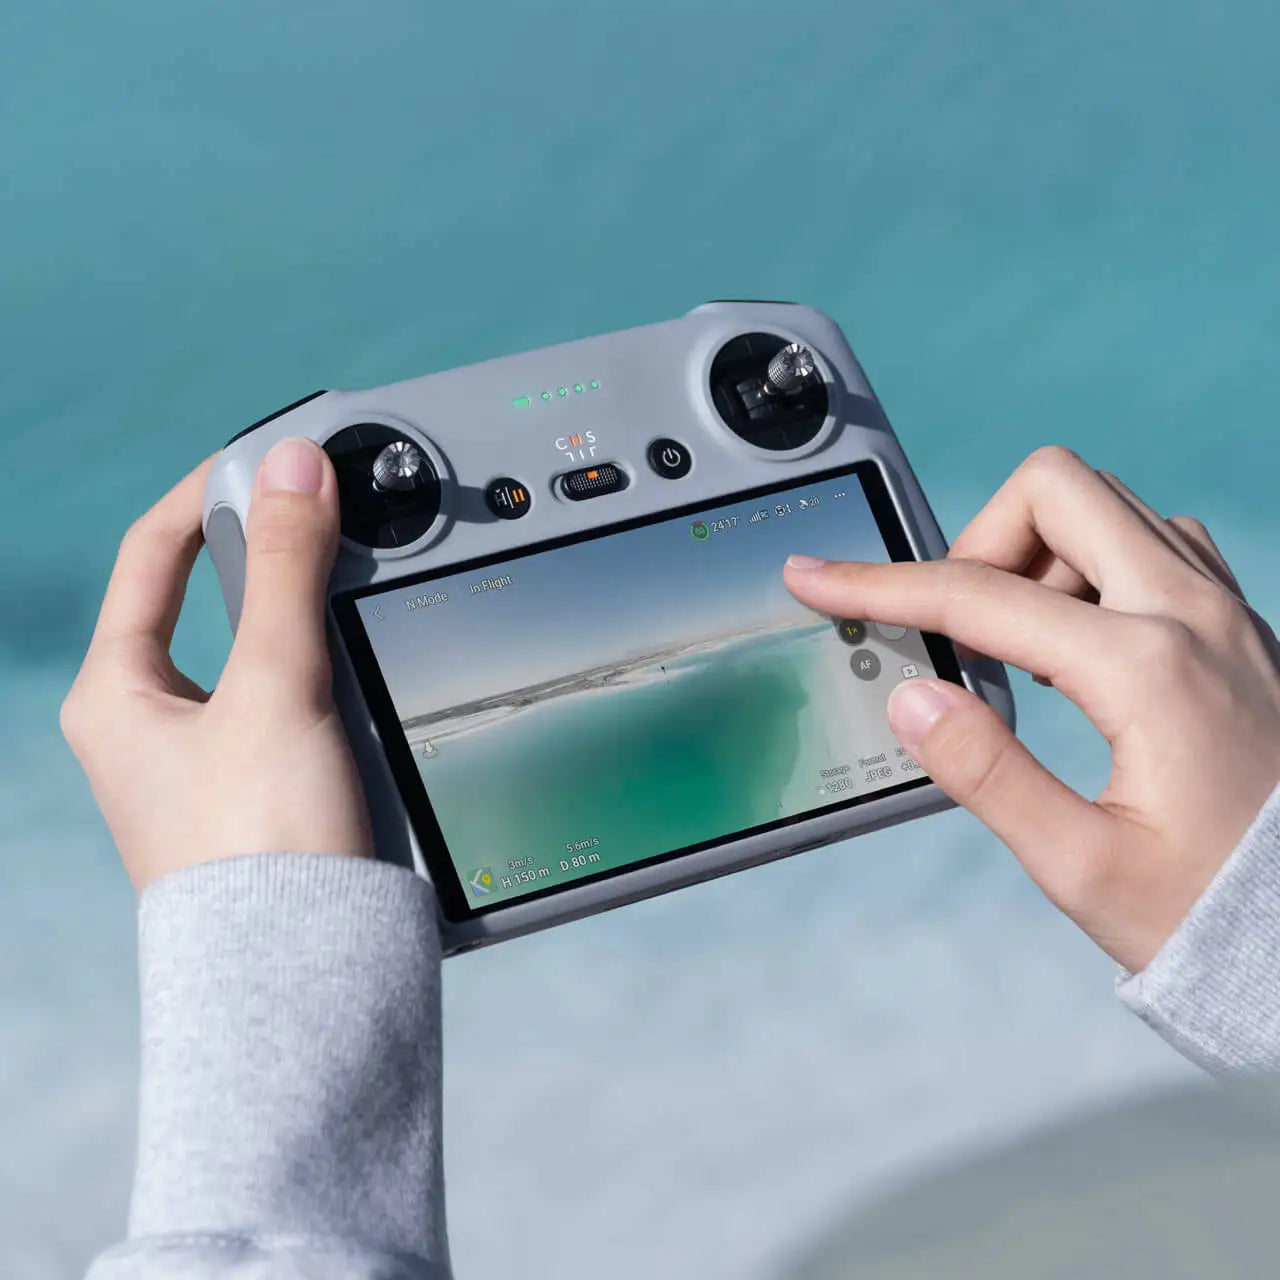 DJI RC Remote Controller, DJI RC will switch to the corresponding video transmission technology when connected to other compatible drone